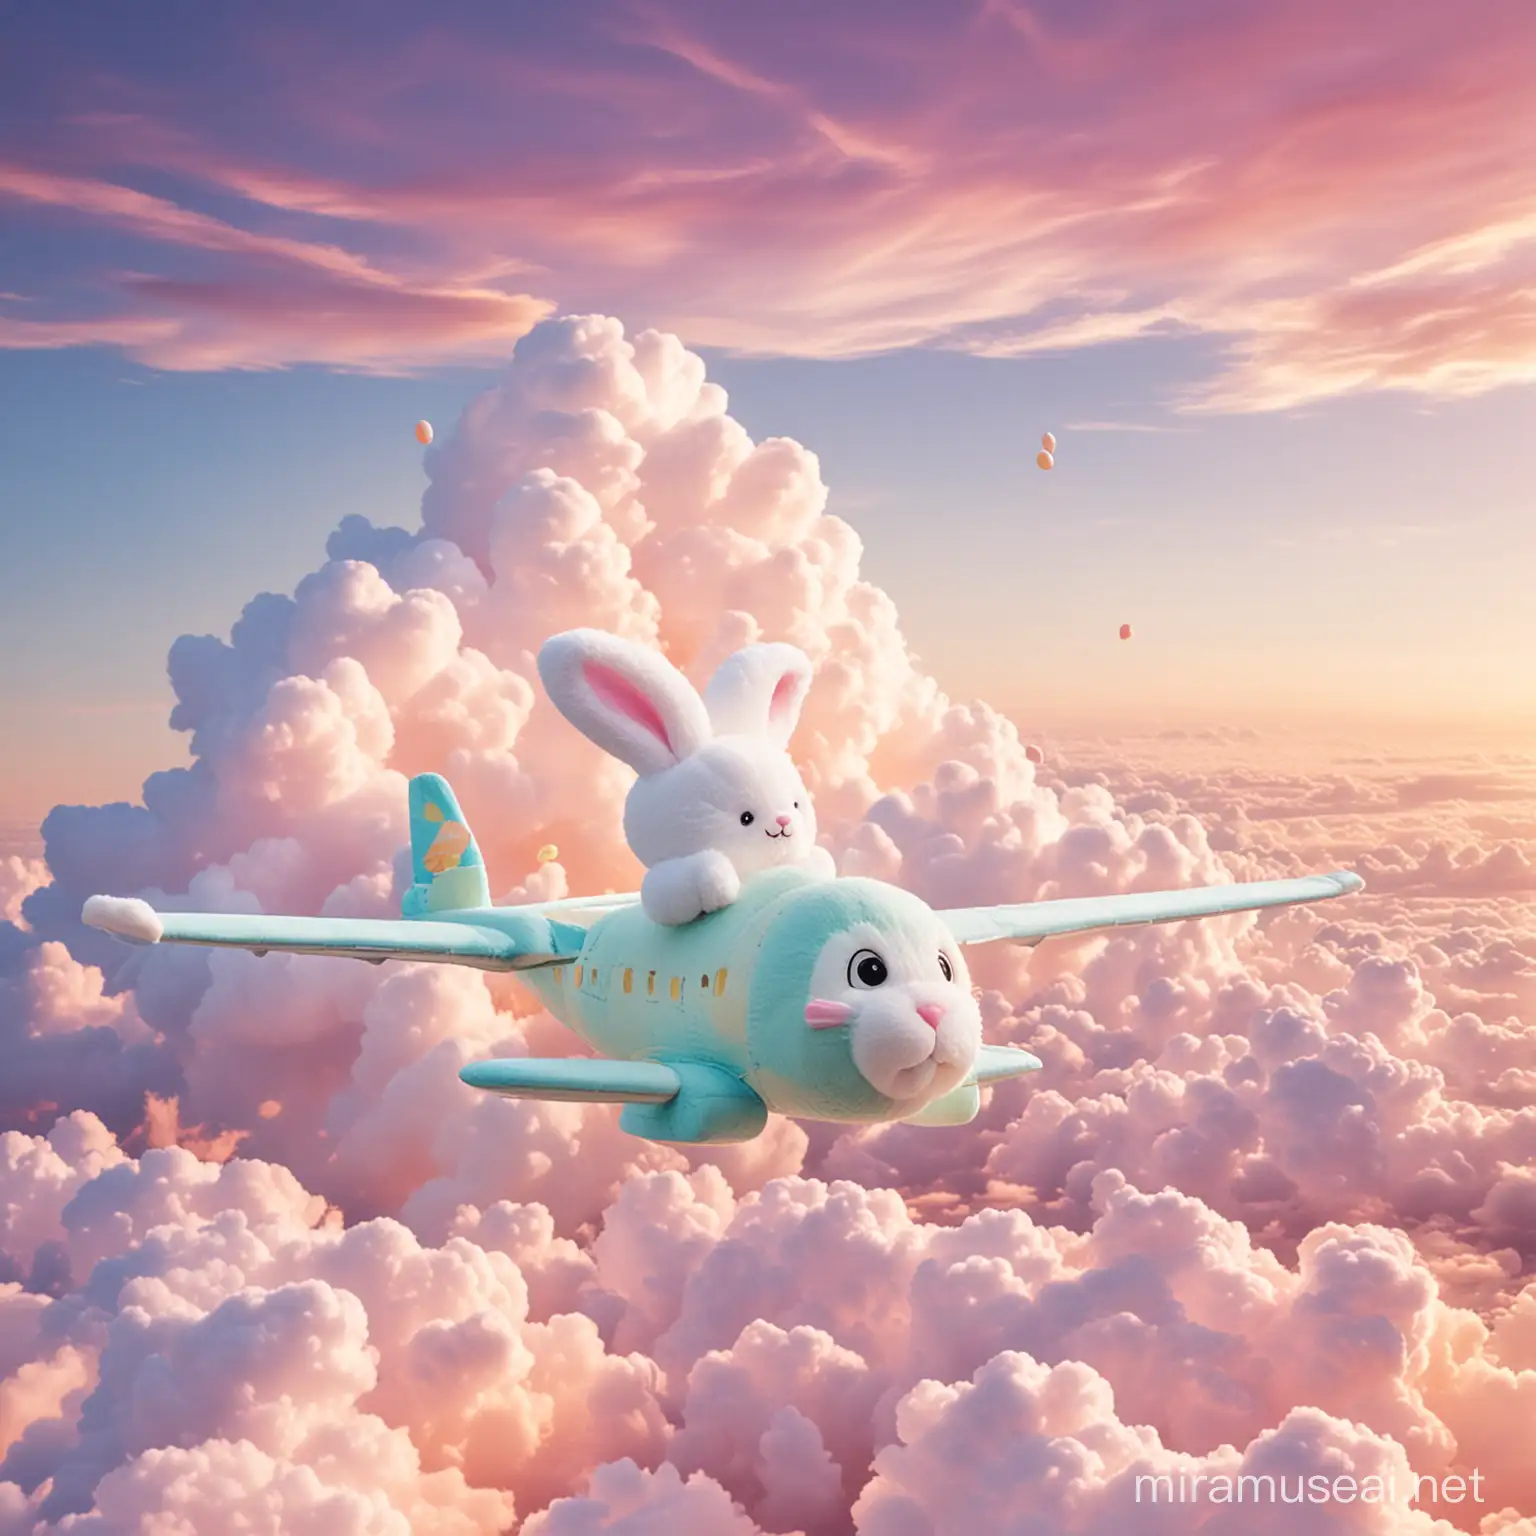 Beautiful lovely Easter bunny Made by fluffy pastel colors clouds in the Sky on an airplane MadeBy marshmallows in pastel colors